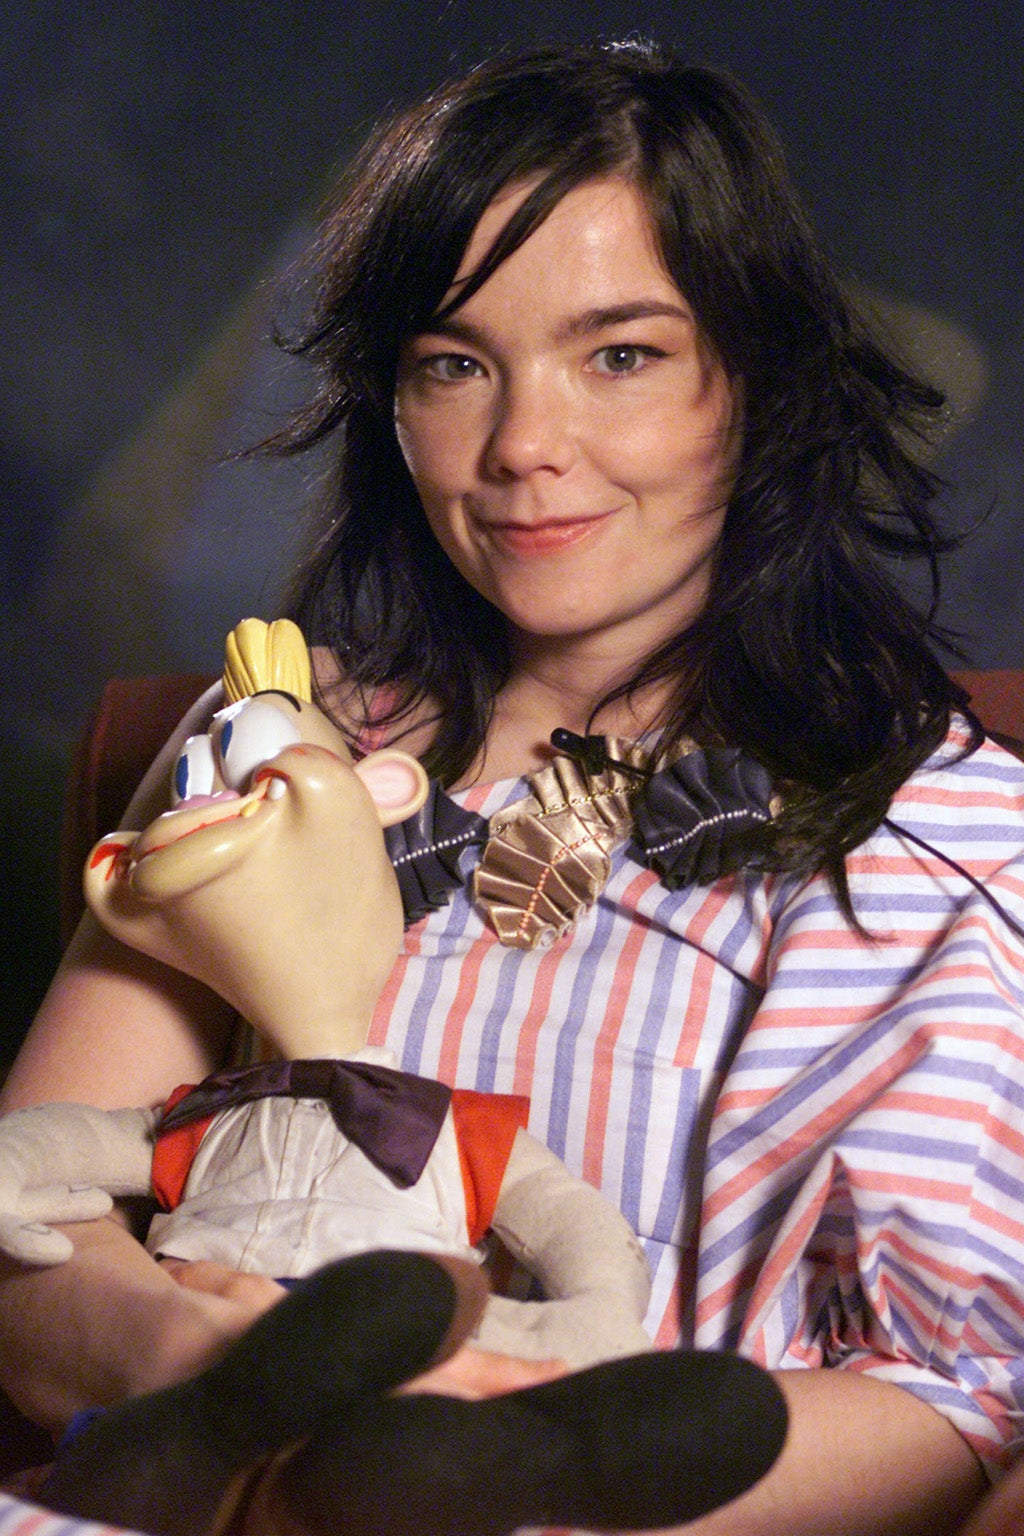 Bjork poses with a doll created by John Kricfalusi, creator of Wren and Stimpy and who also directed one of Bjork video's, during an interview for Getmusic at the Elektra offices in New York City